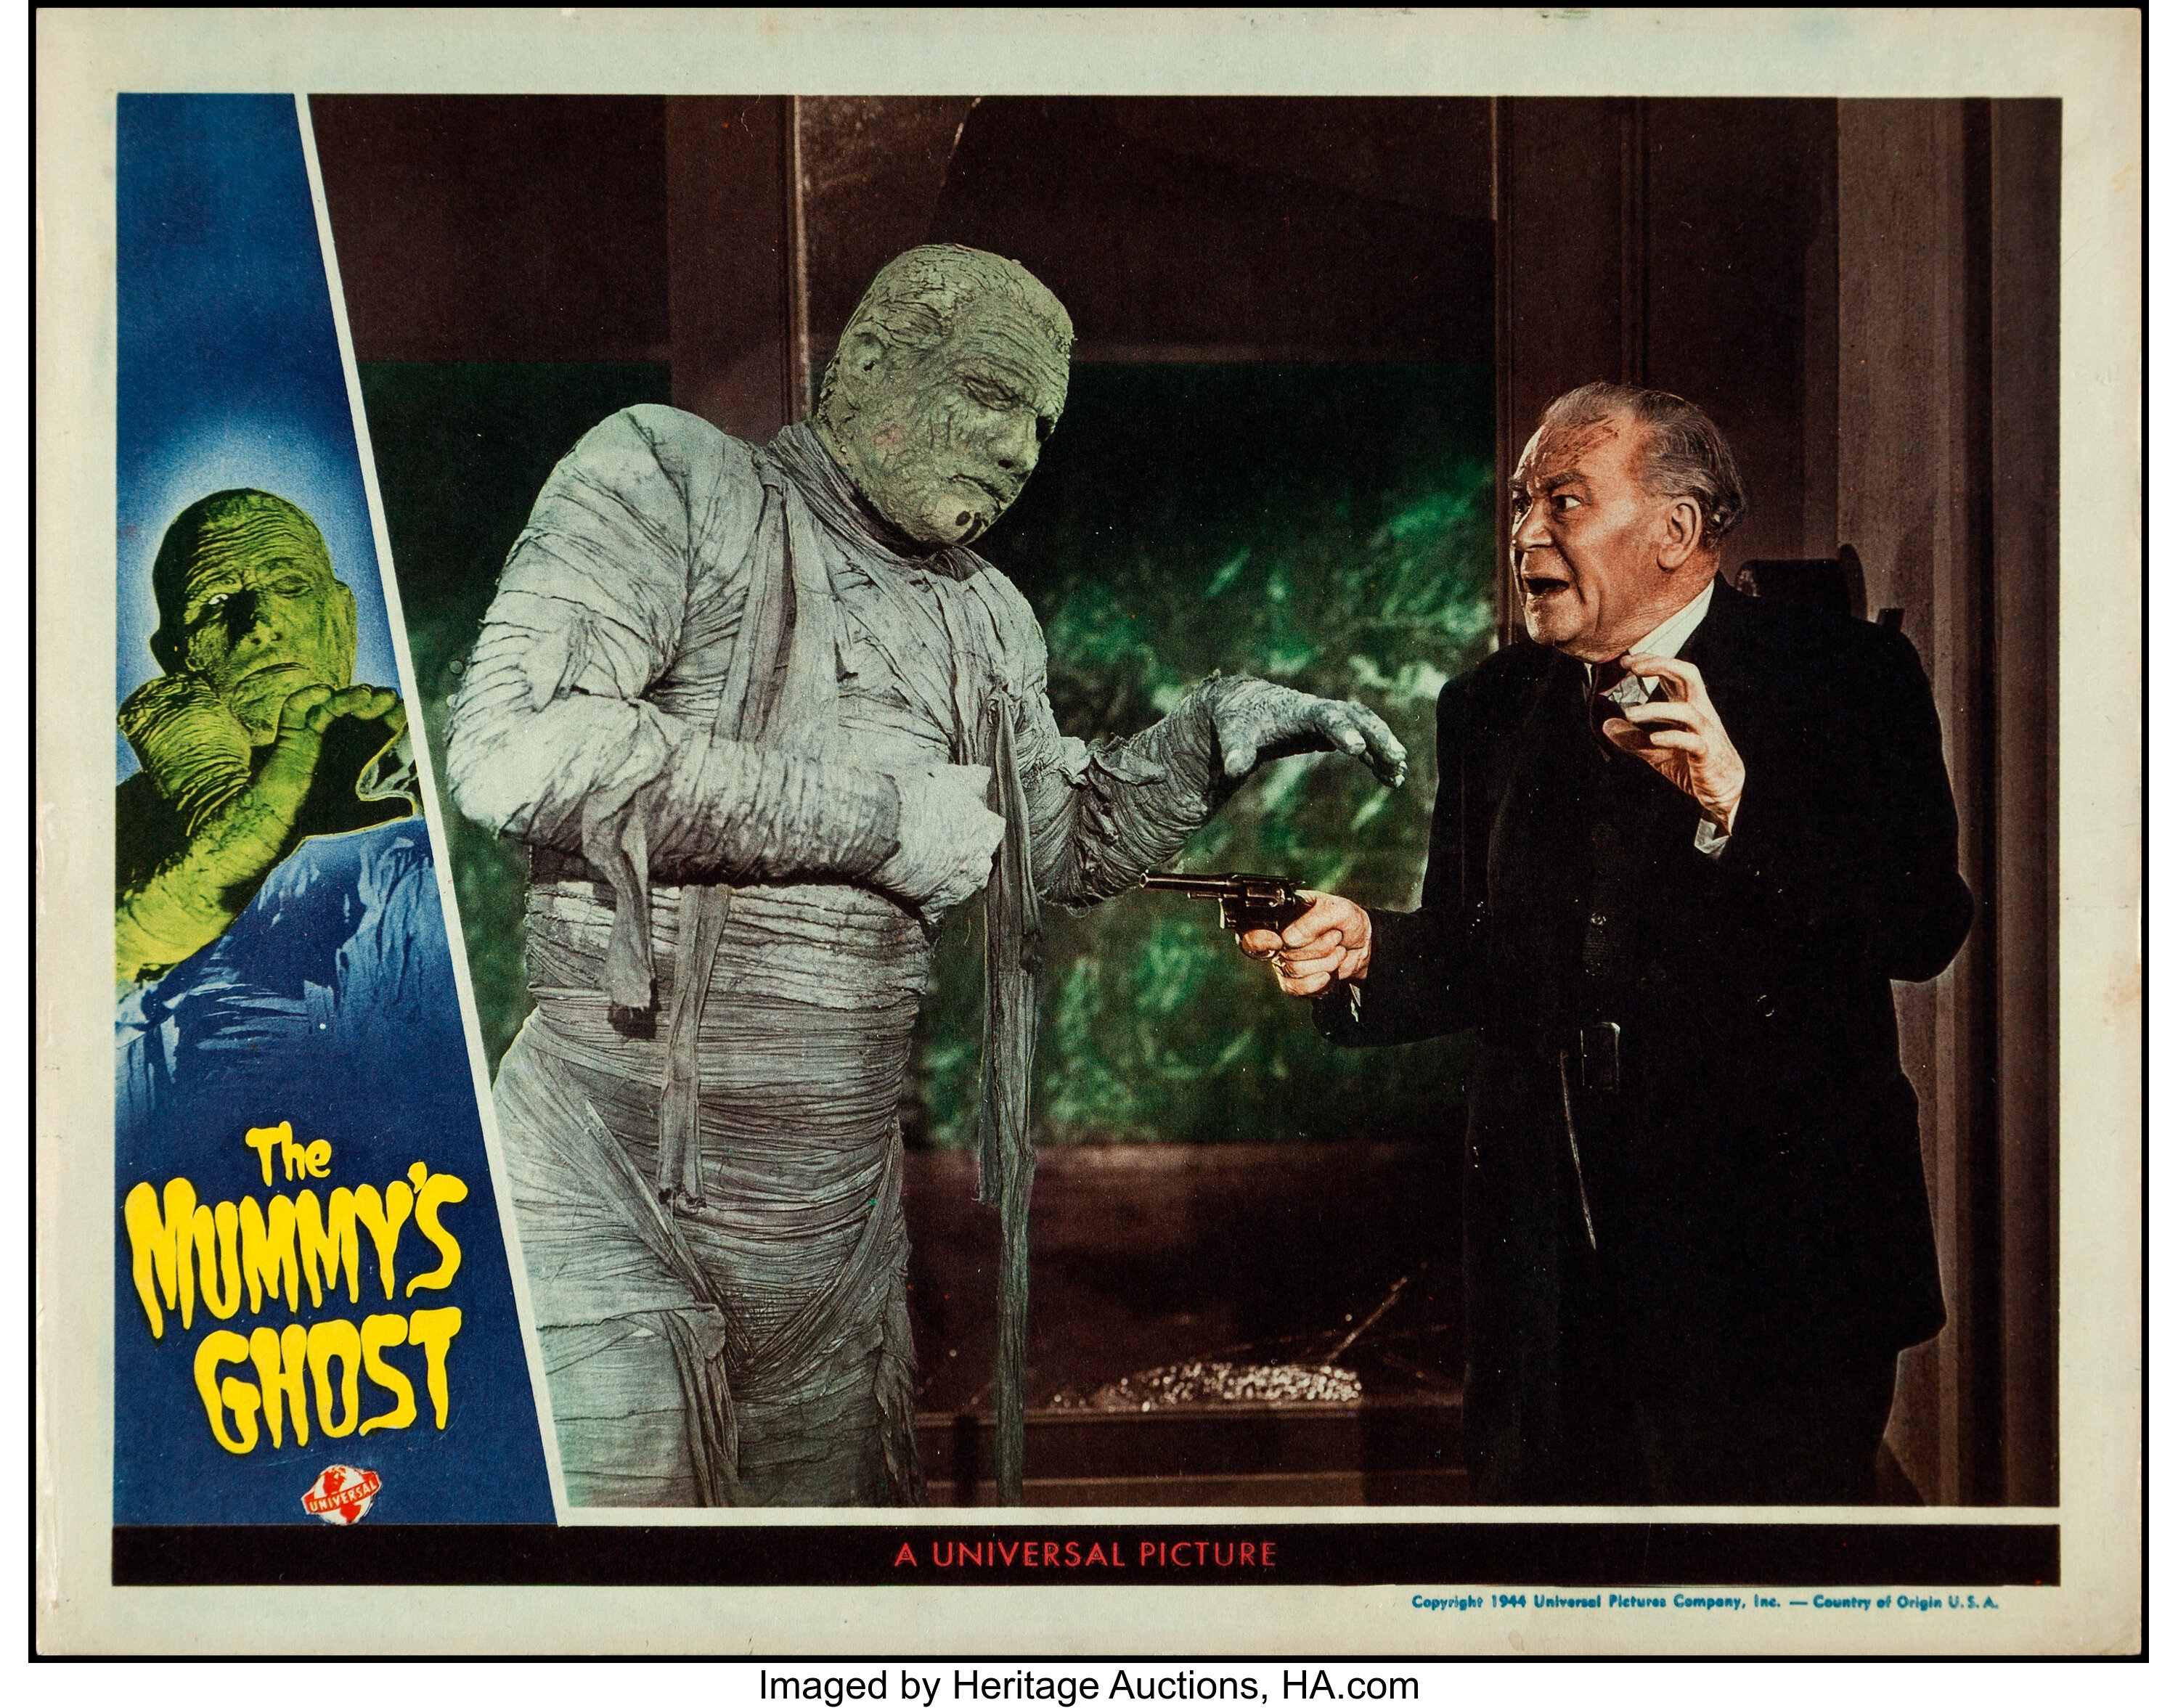 The Mummys Ghost Universal 1944 Lobby Card 11 X 14 Lot 86320 Heritage Auctions 3055